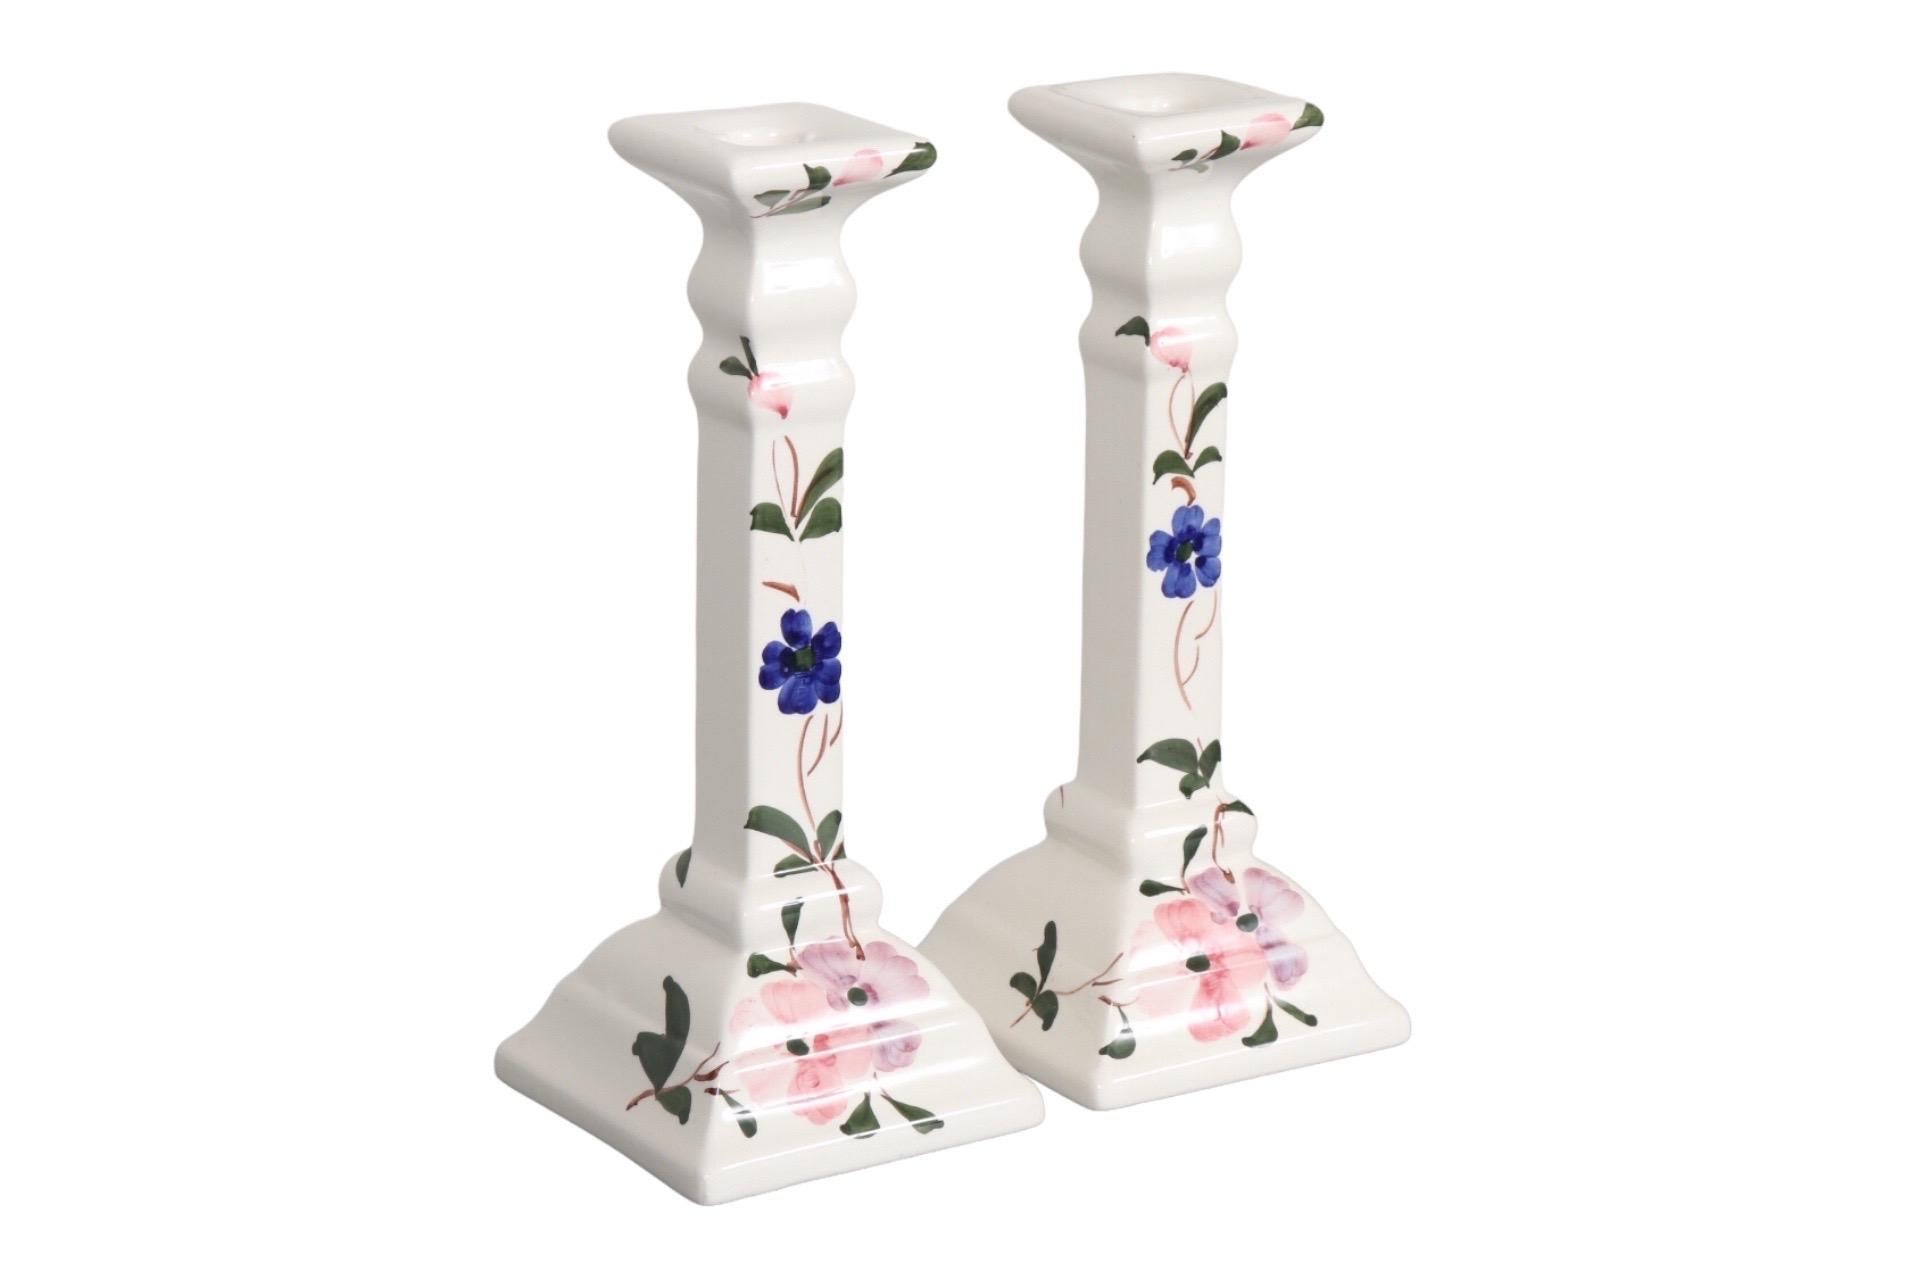 A pair of white ceramic square candlestick holders. Brightly decorated on opposing sides with hand painted trailing pansies in pink, violet and indigo. Made in Portugal. Dimensions per candlestick.
   